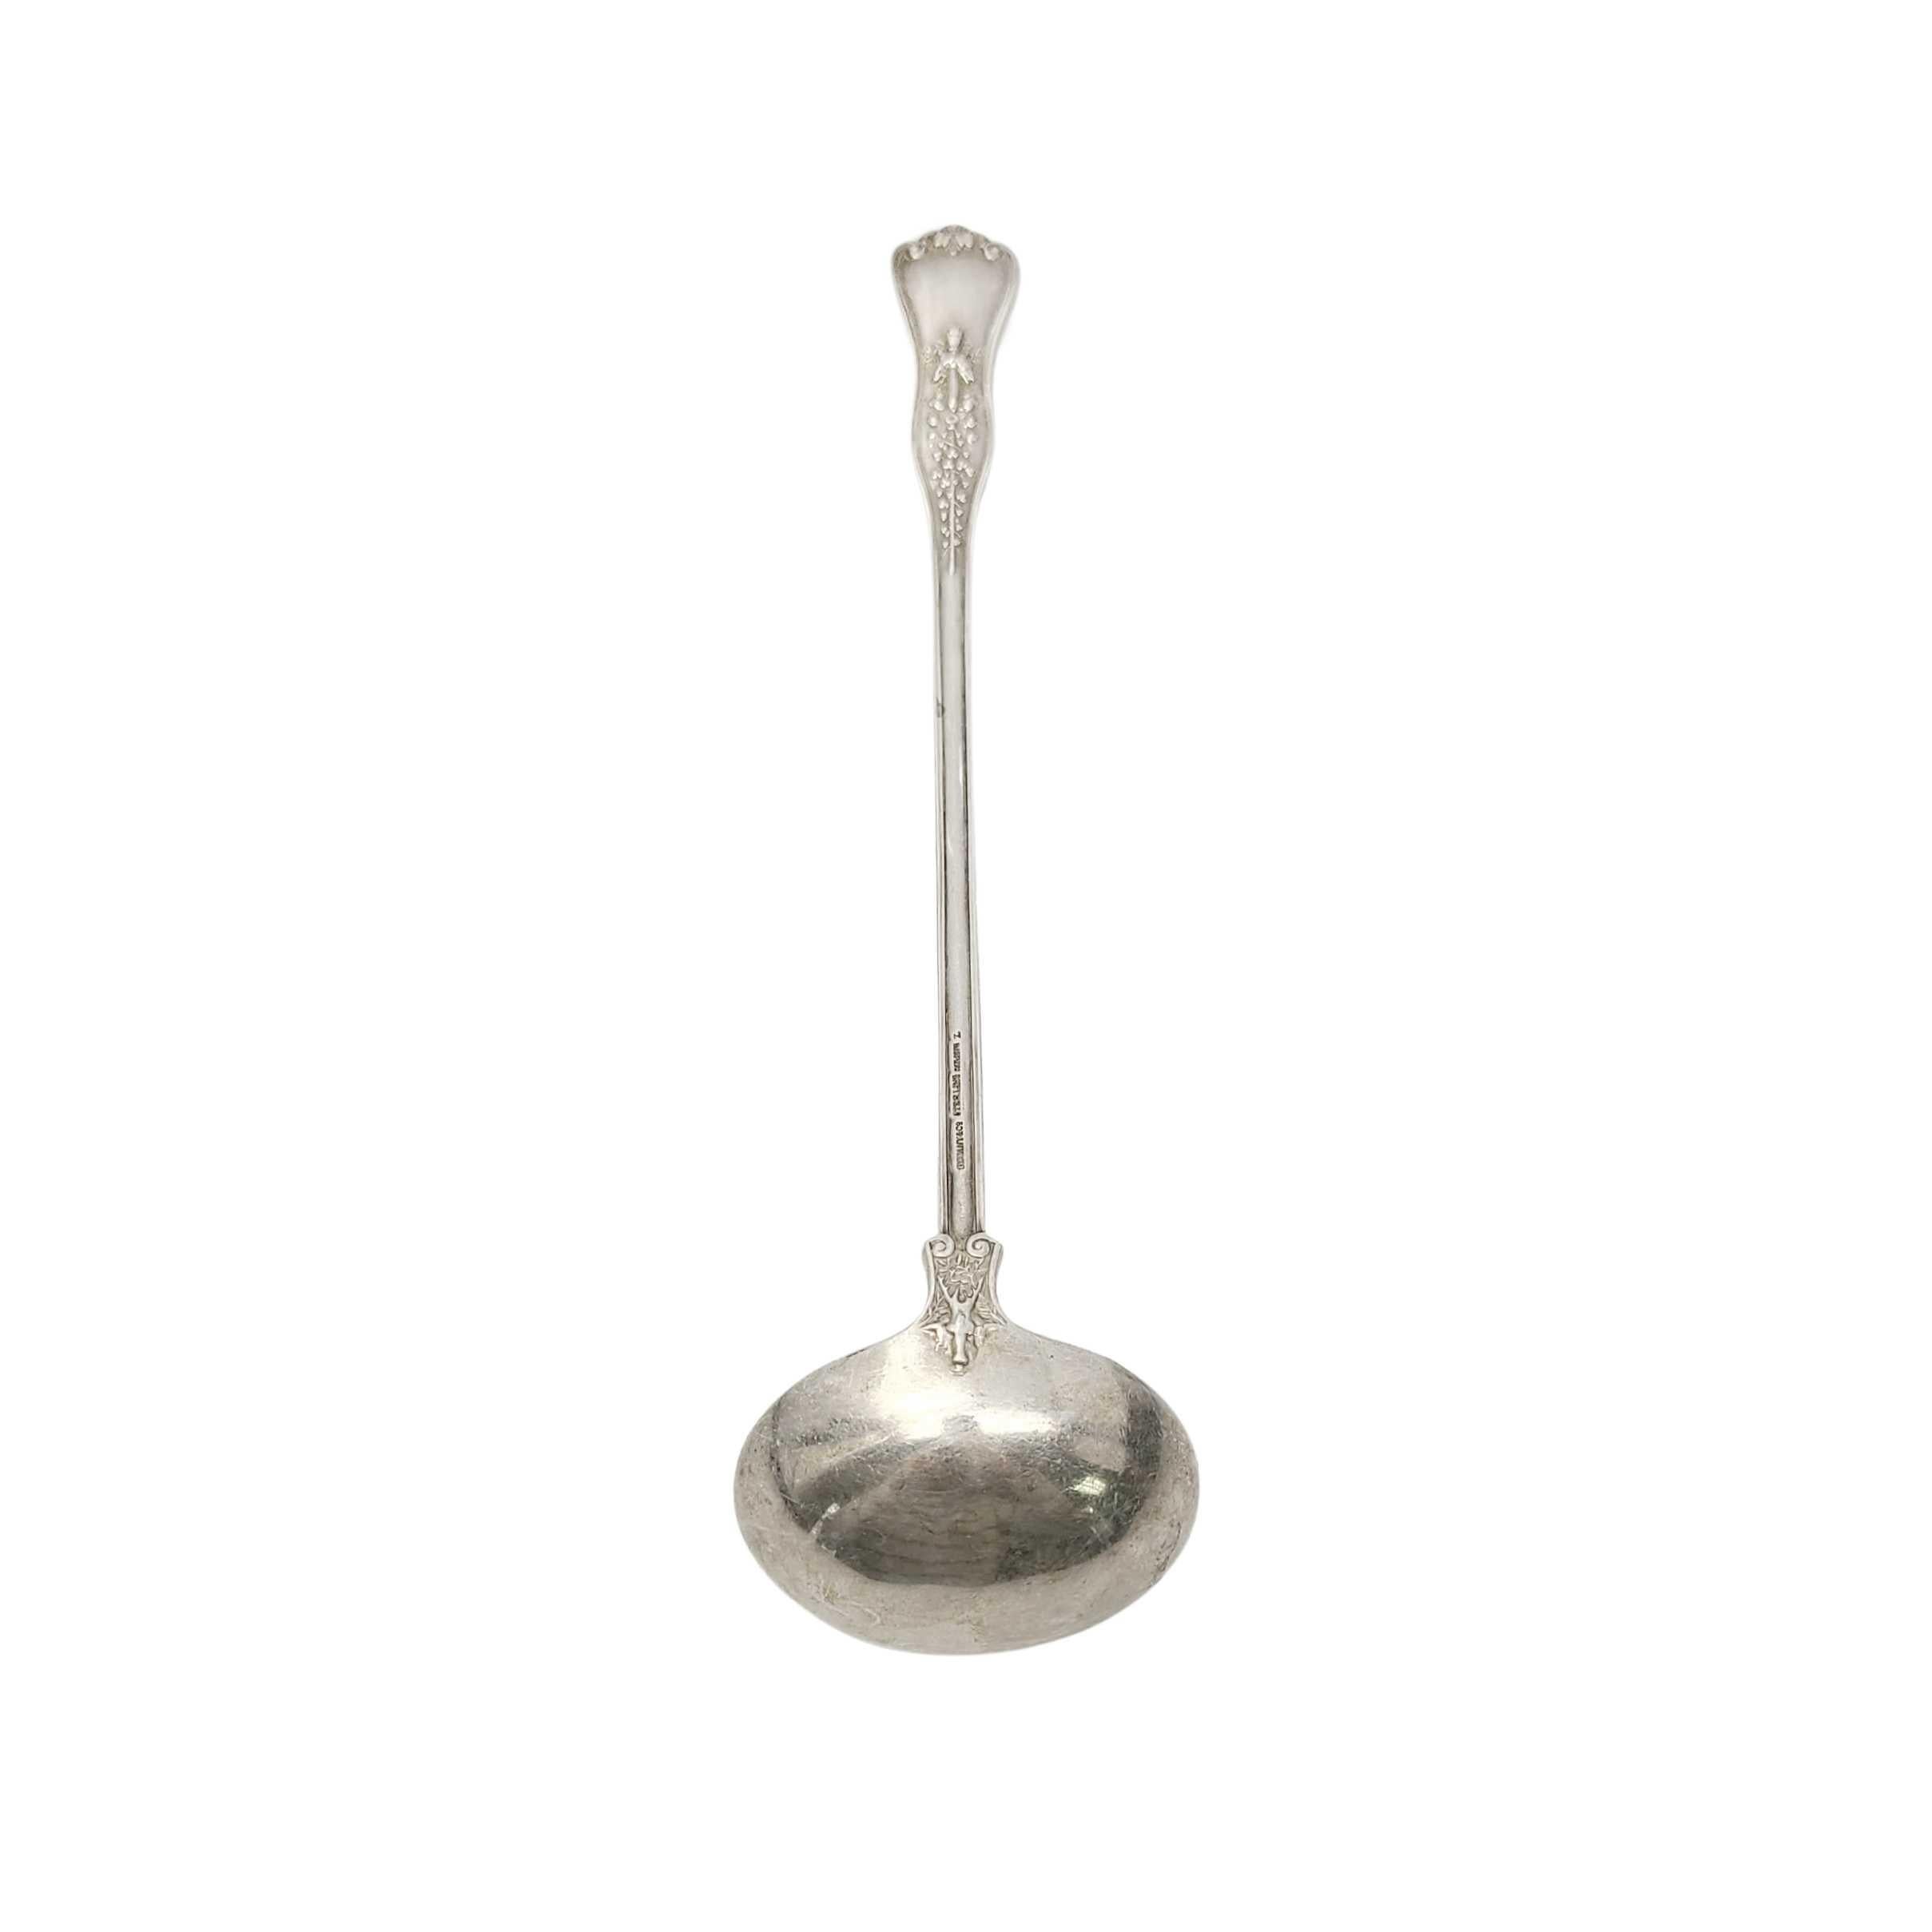 Vintage Tiffany & Co. sterling silver cream ladle in the Olympian pattern.

The Olympian pattern was introduced in 1878, it is an ornate and elaborate multi-motif pattern, featuring 17 different sharply carved handle decorations depicting scenes